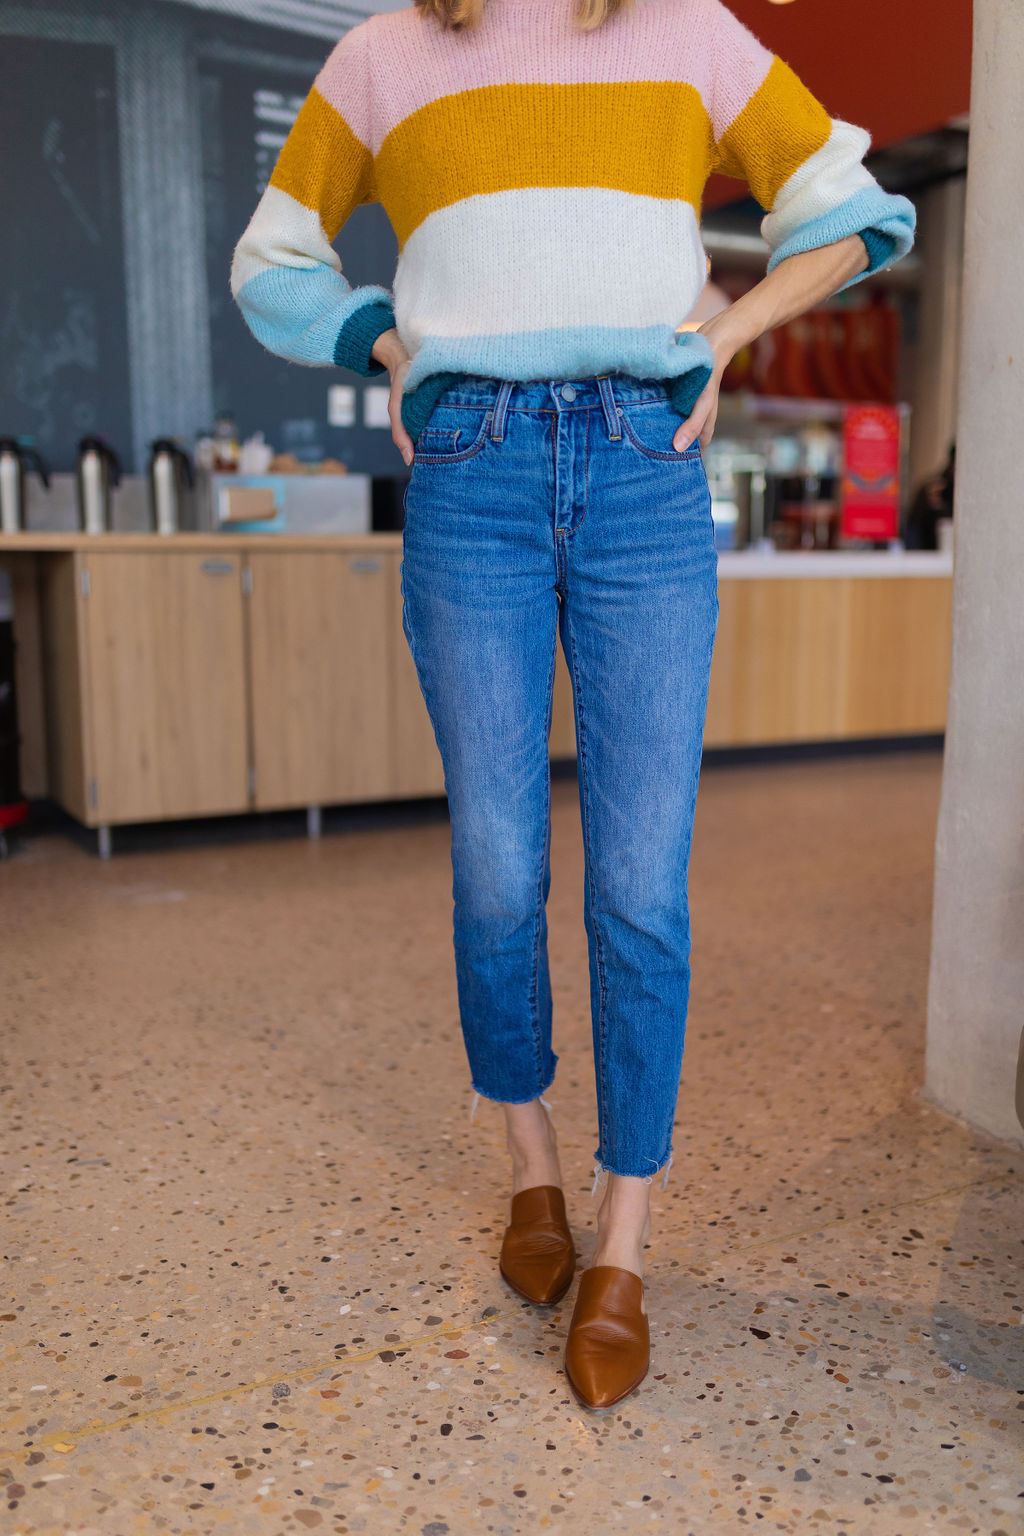 ankle jeans and sweater outfit